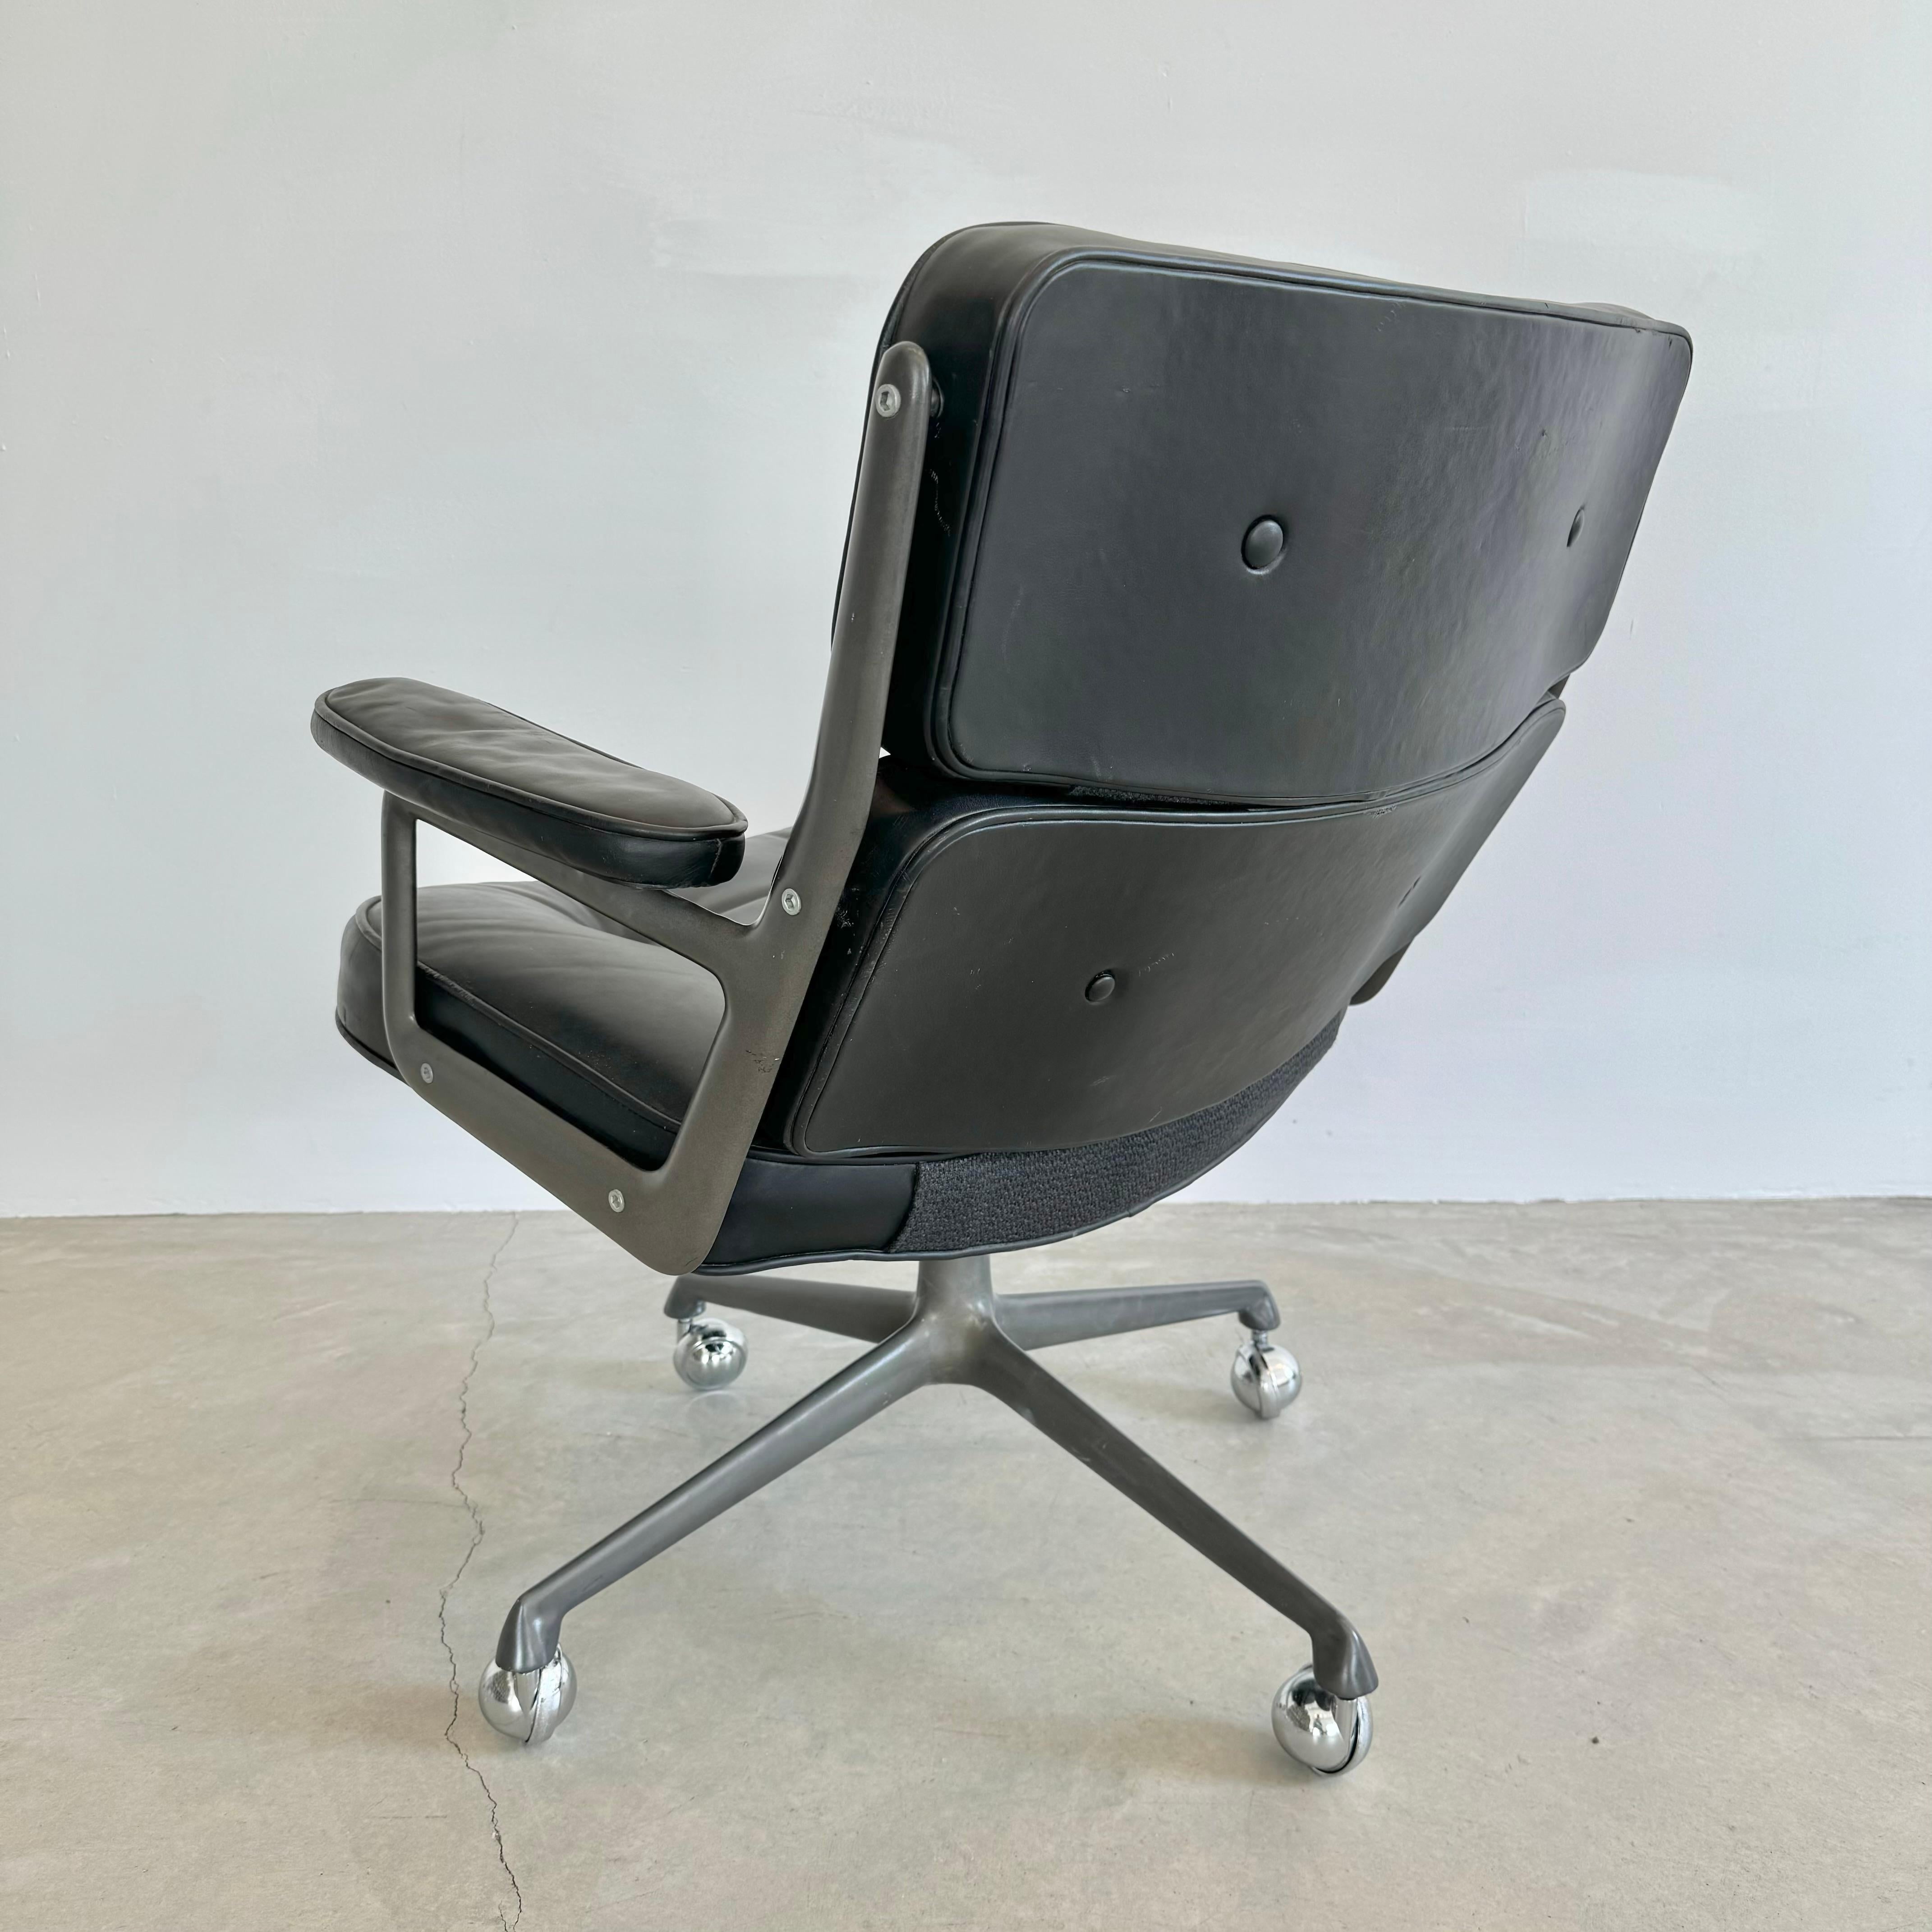 Eames Time Life Lobby Lounge Chair in Black Leather for Herman Miller, 1980s USA In Good Condition For Sale In Los Angeles, CA